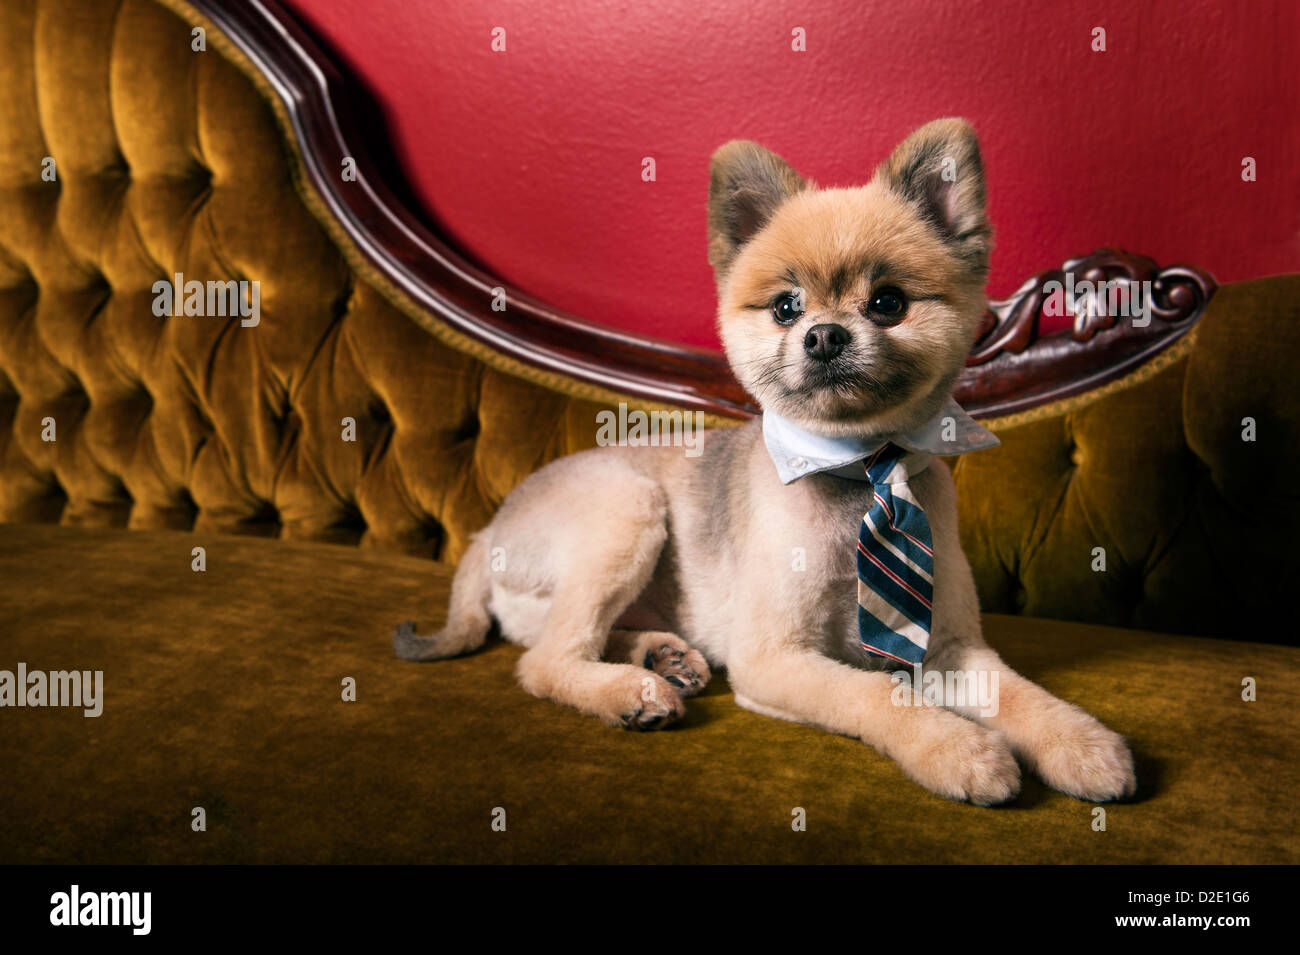 groomed / shaved Pomeranian dog dressed with a neck tie in fancy setting Stock Photo